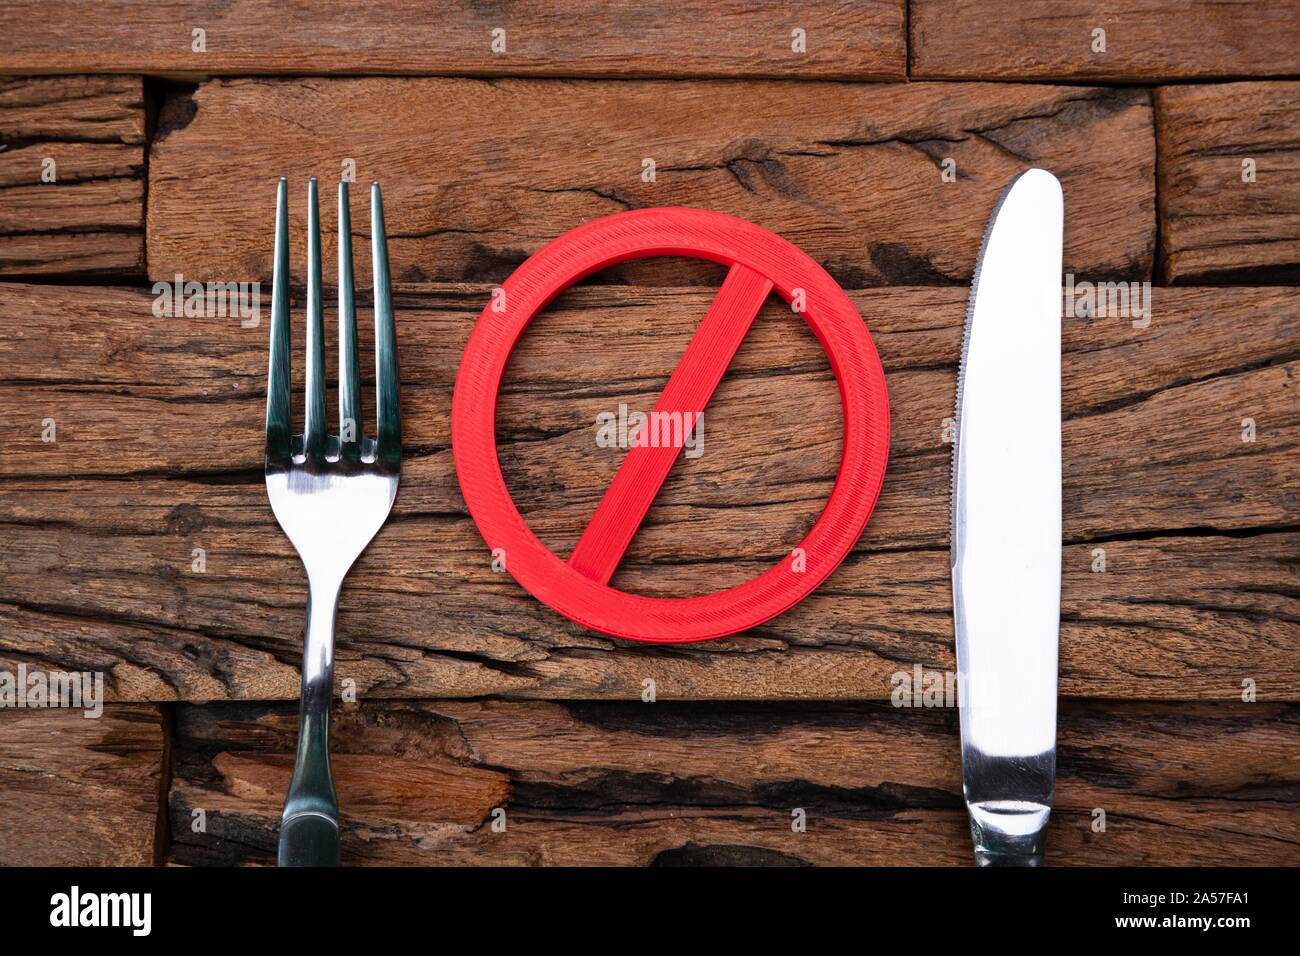 Stop Sign Near Fork And Knife On Wooden Table Stock Photo